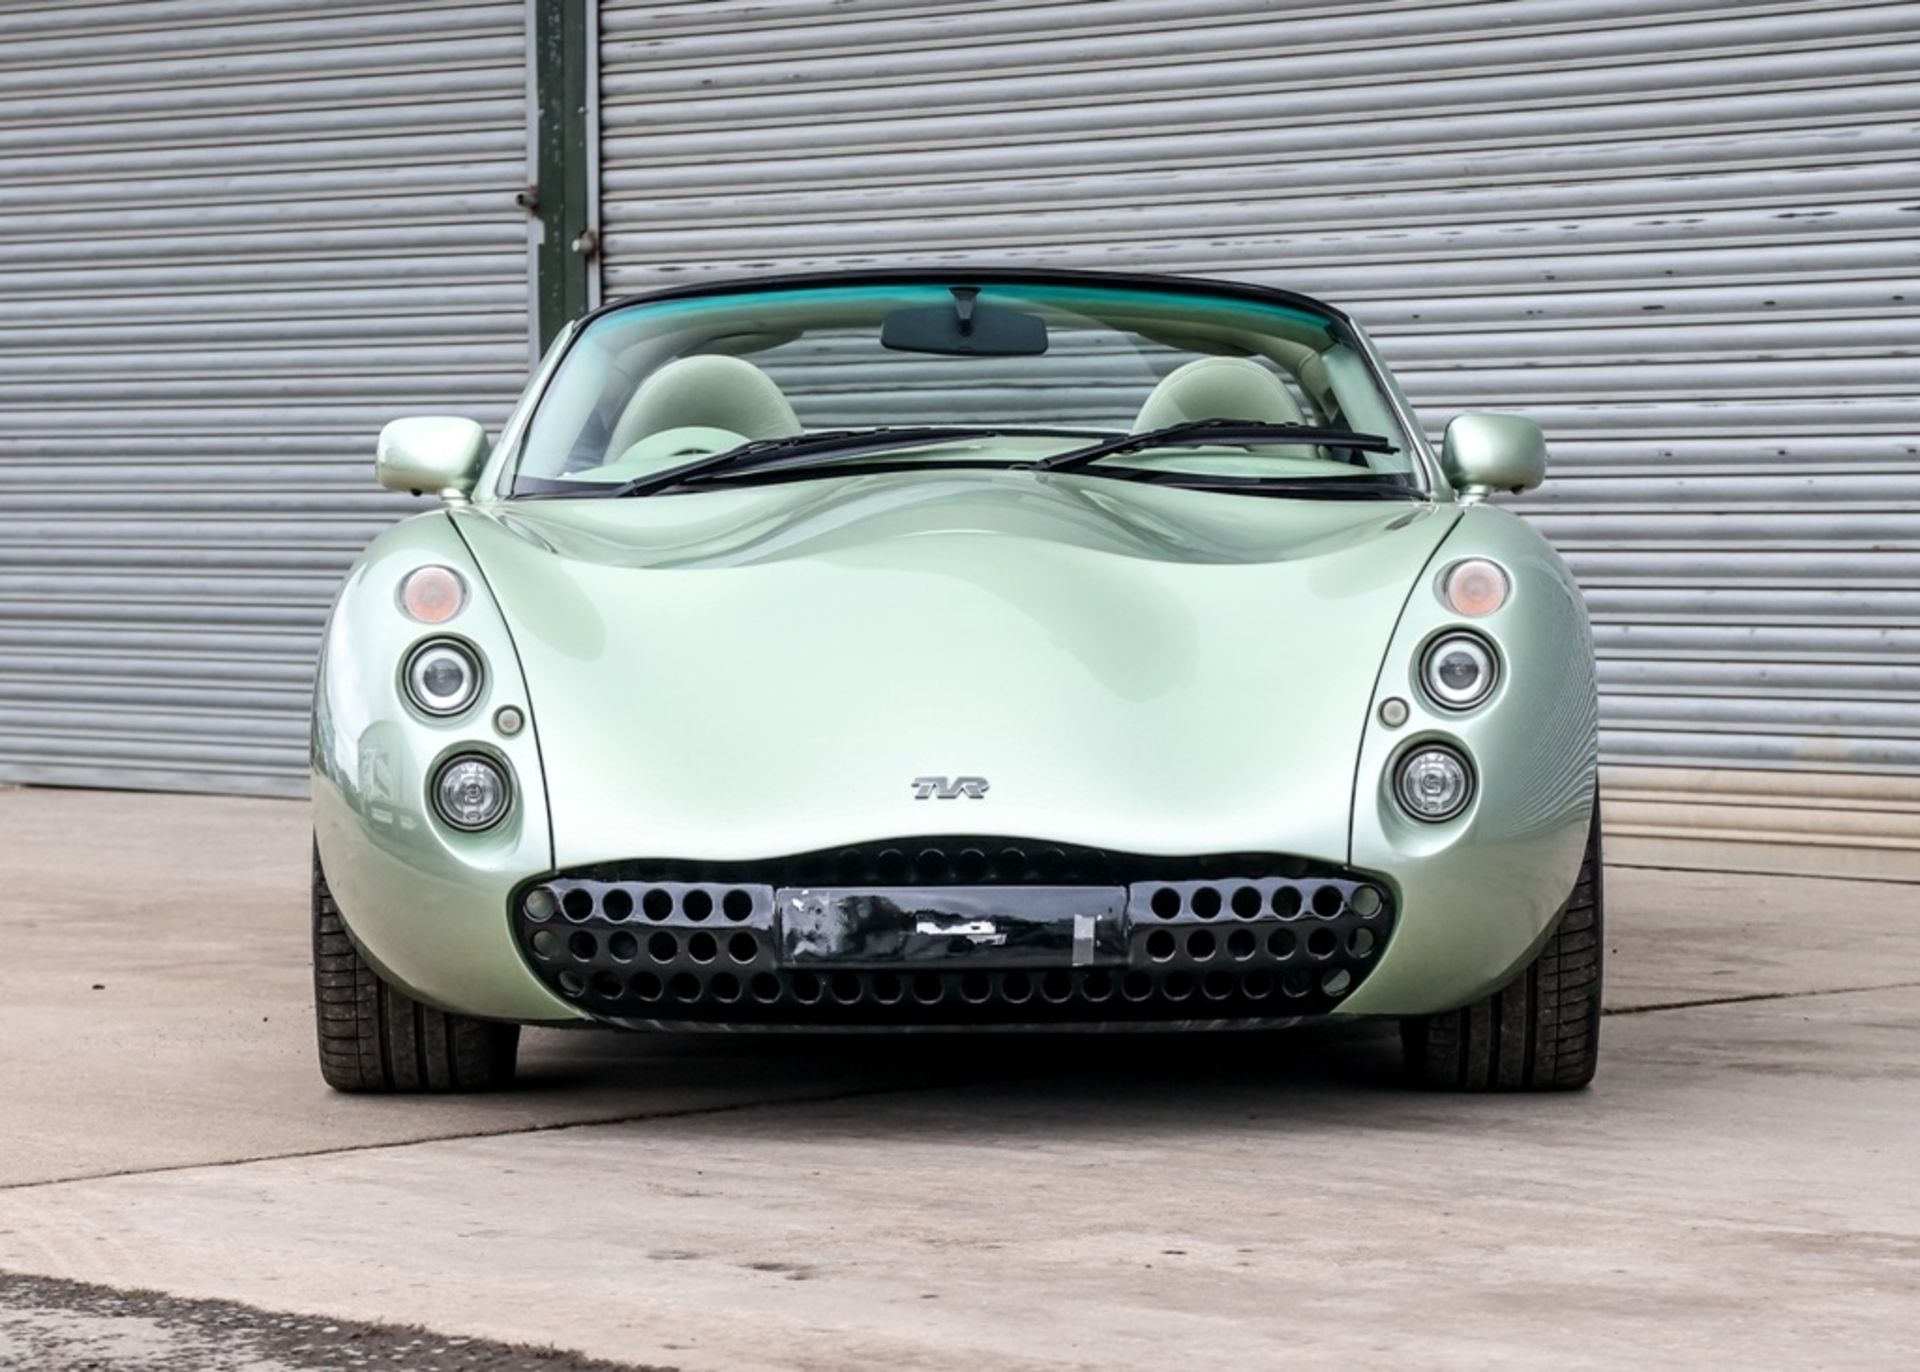 2001 TVR Tuscan Speed Six - Image 14 of 15